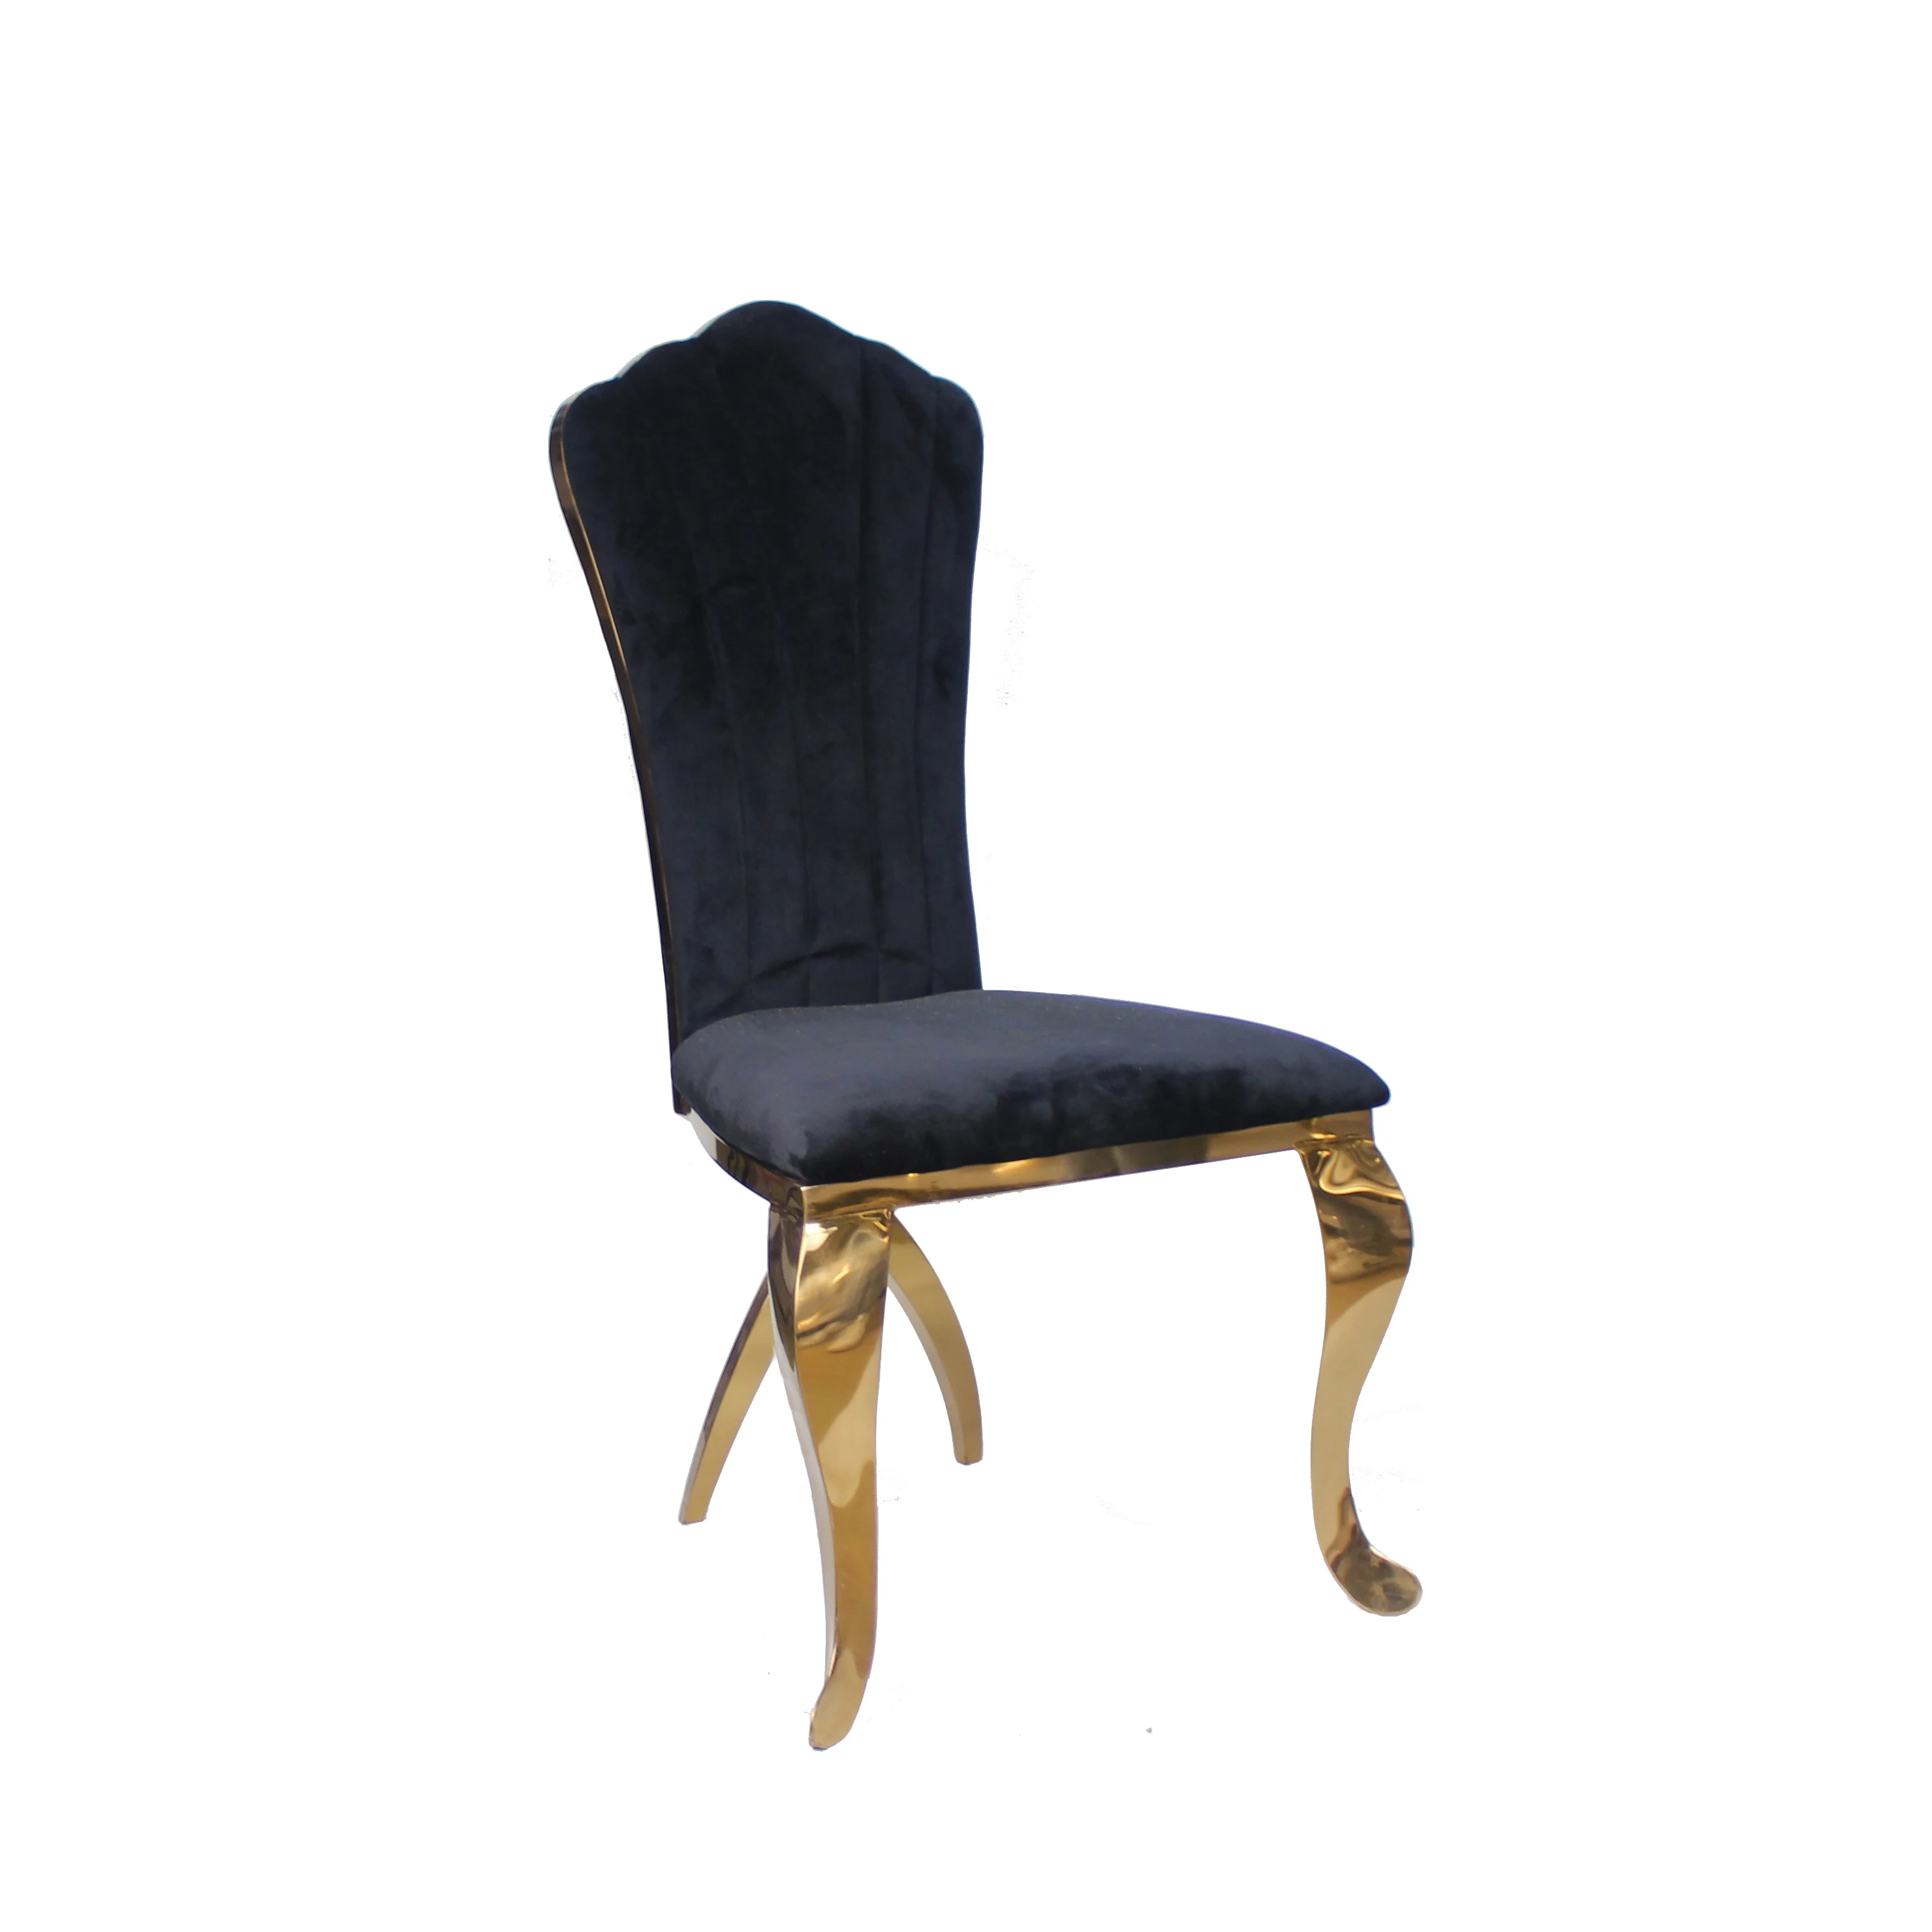 

Hot Selling Chinese Stainless Steel and Metal Resin Dining Chairs Modern Banquet and Event Furniture for Hotel Lobby for Sale